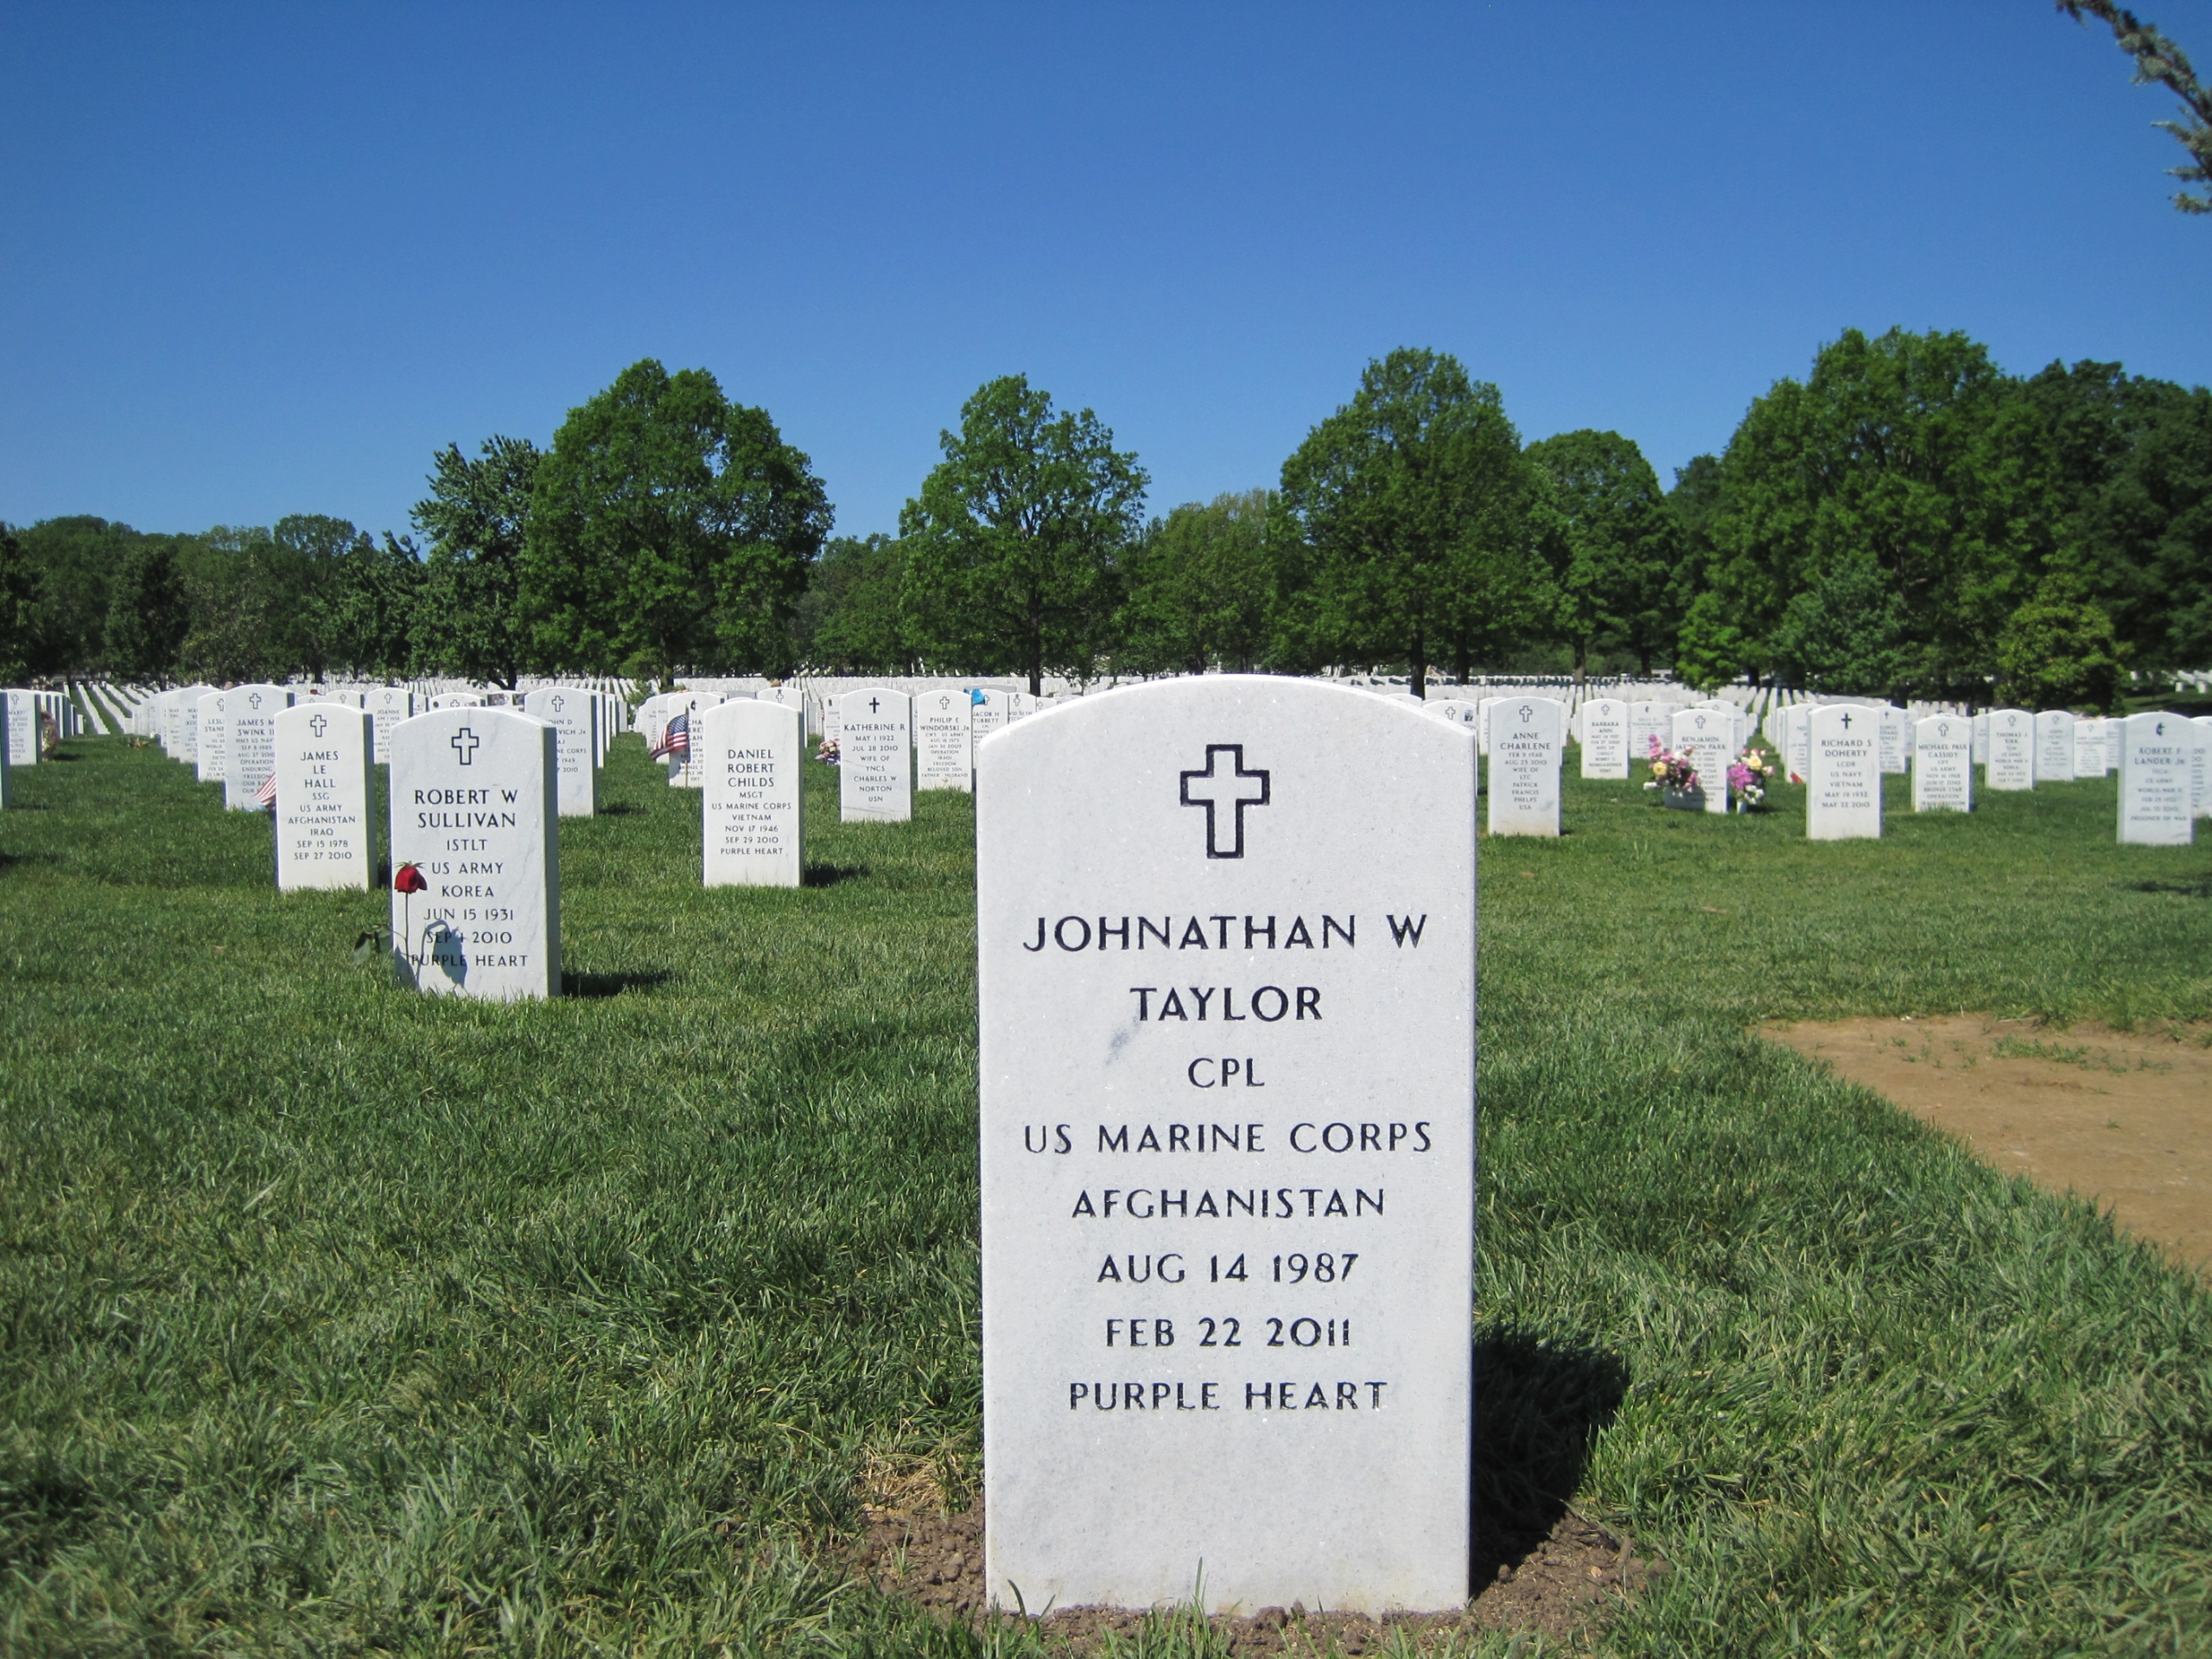 jwtaylor-gravesite-photo-by-eileen-horan-may-2011-003